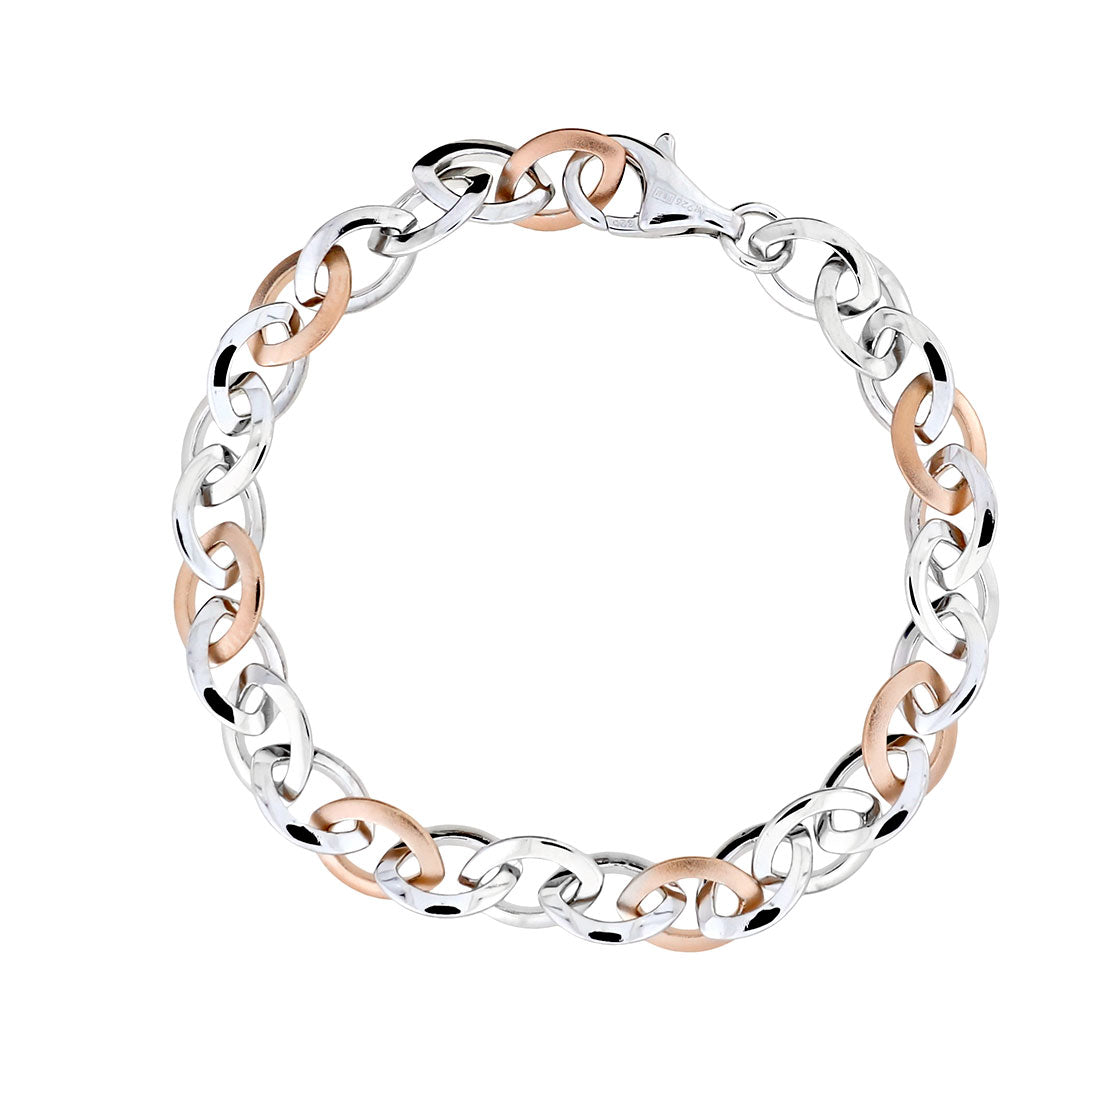 Abstraction Marquise Bracelet